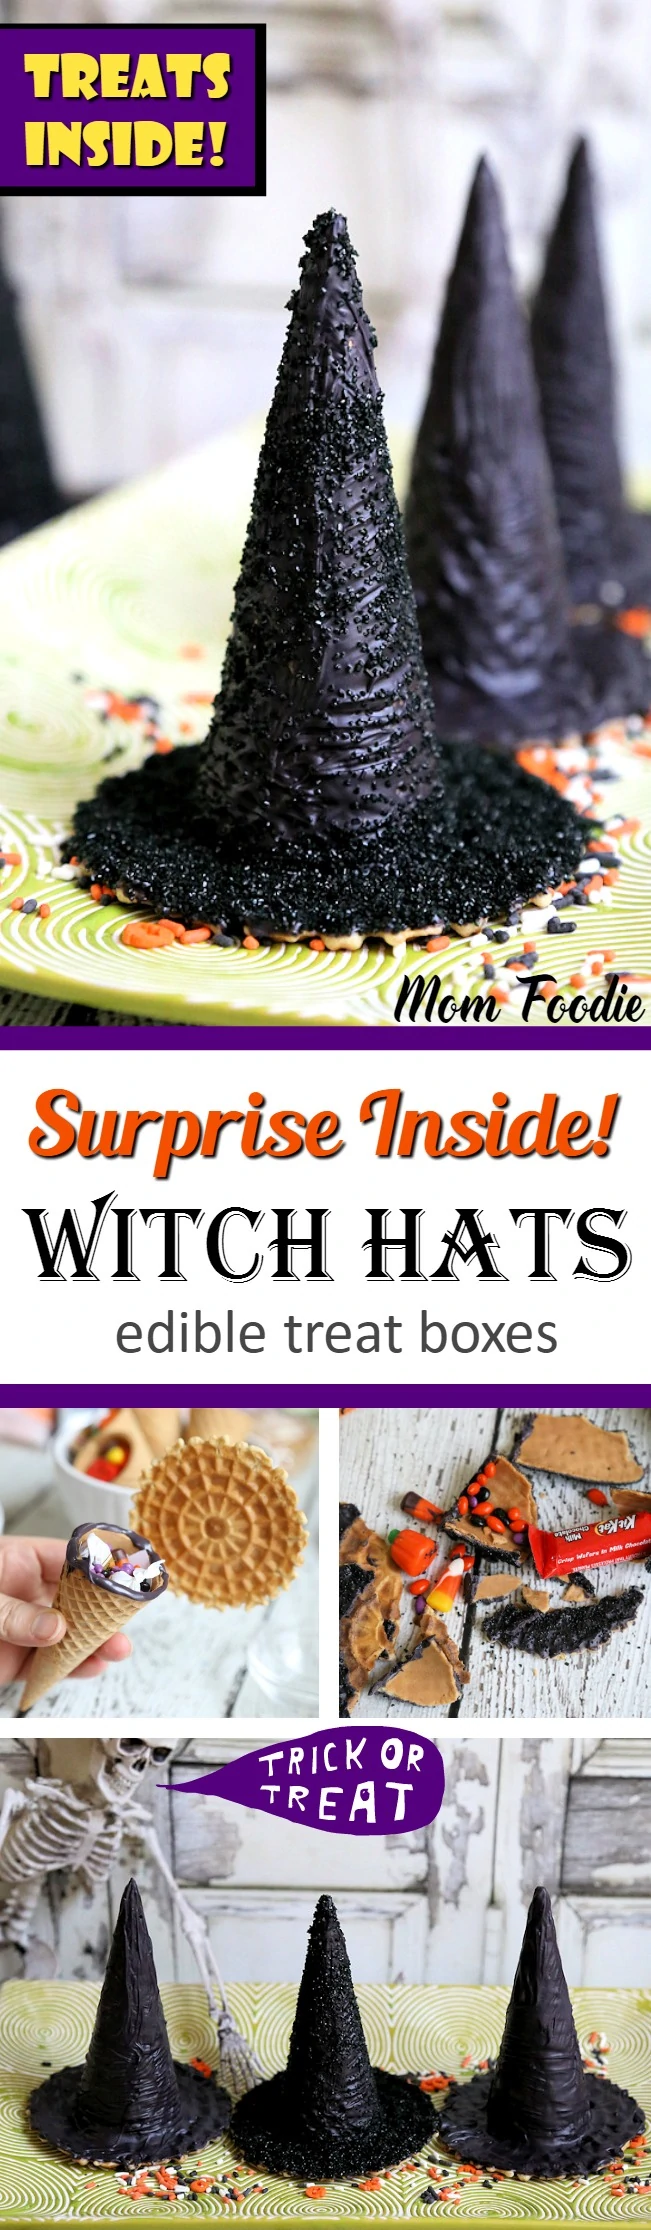 Surprise Inside Halloween Witch Hats edible treat boxes.jpg